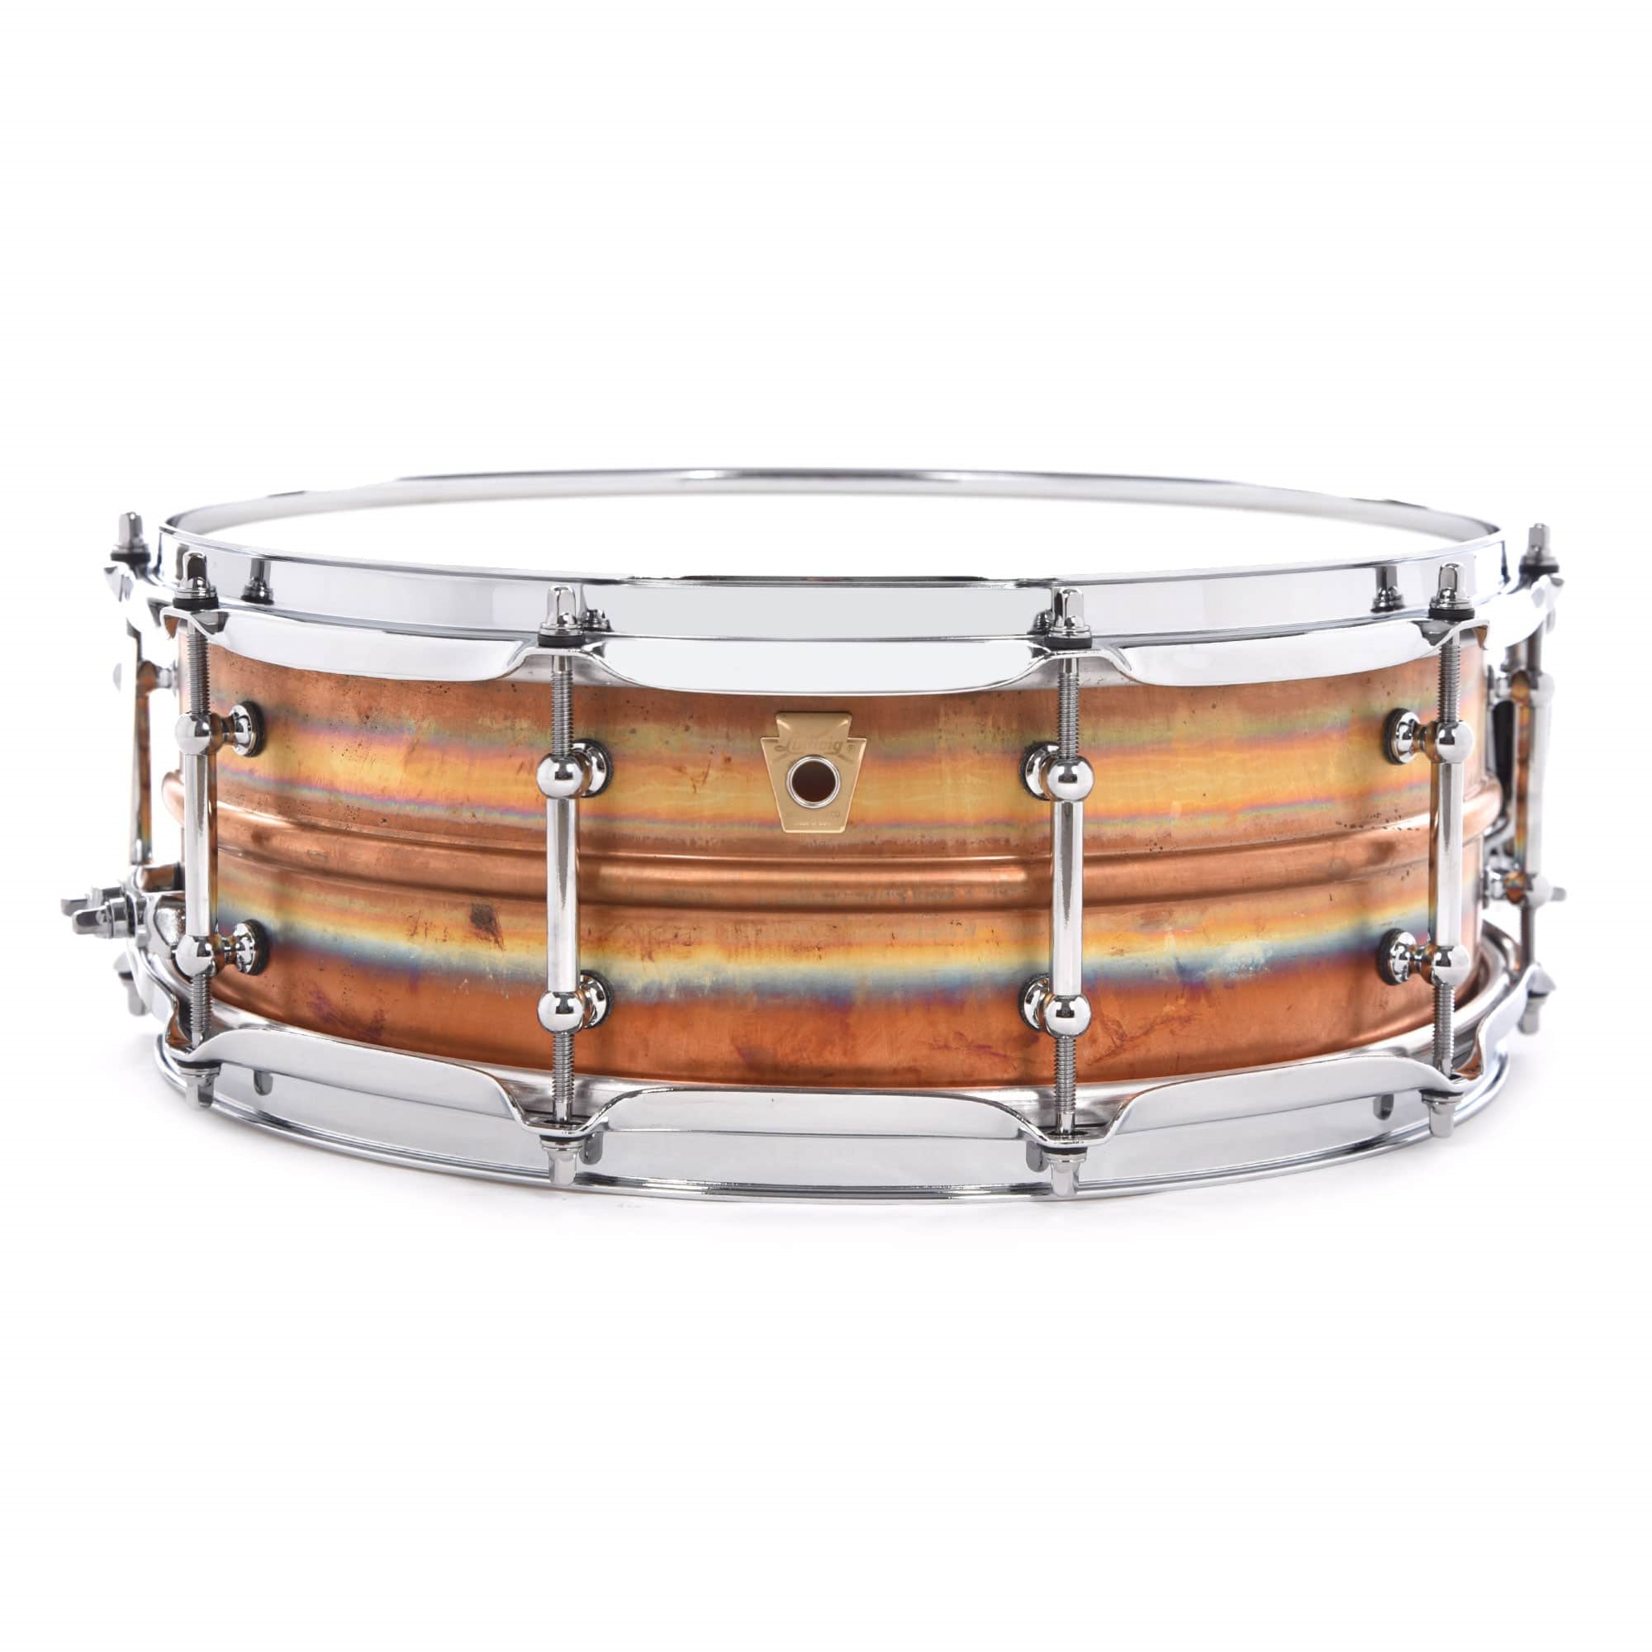 Ludwig Ludwig 5x14" Raw Bronze Snare Drum with Tube Lugs LB550RT